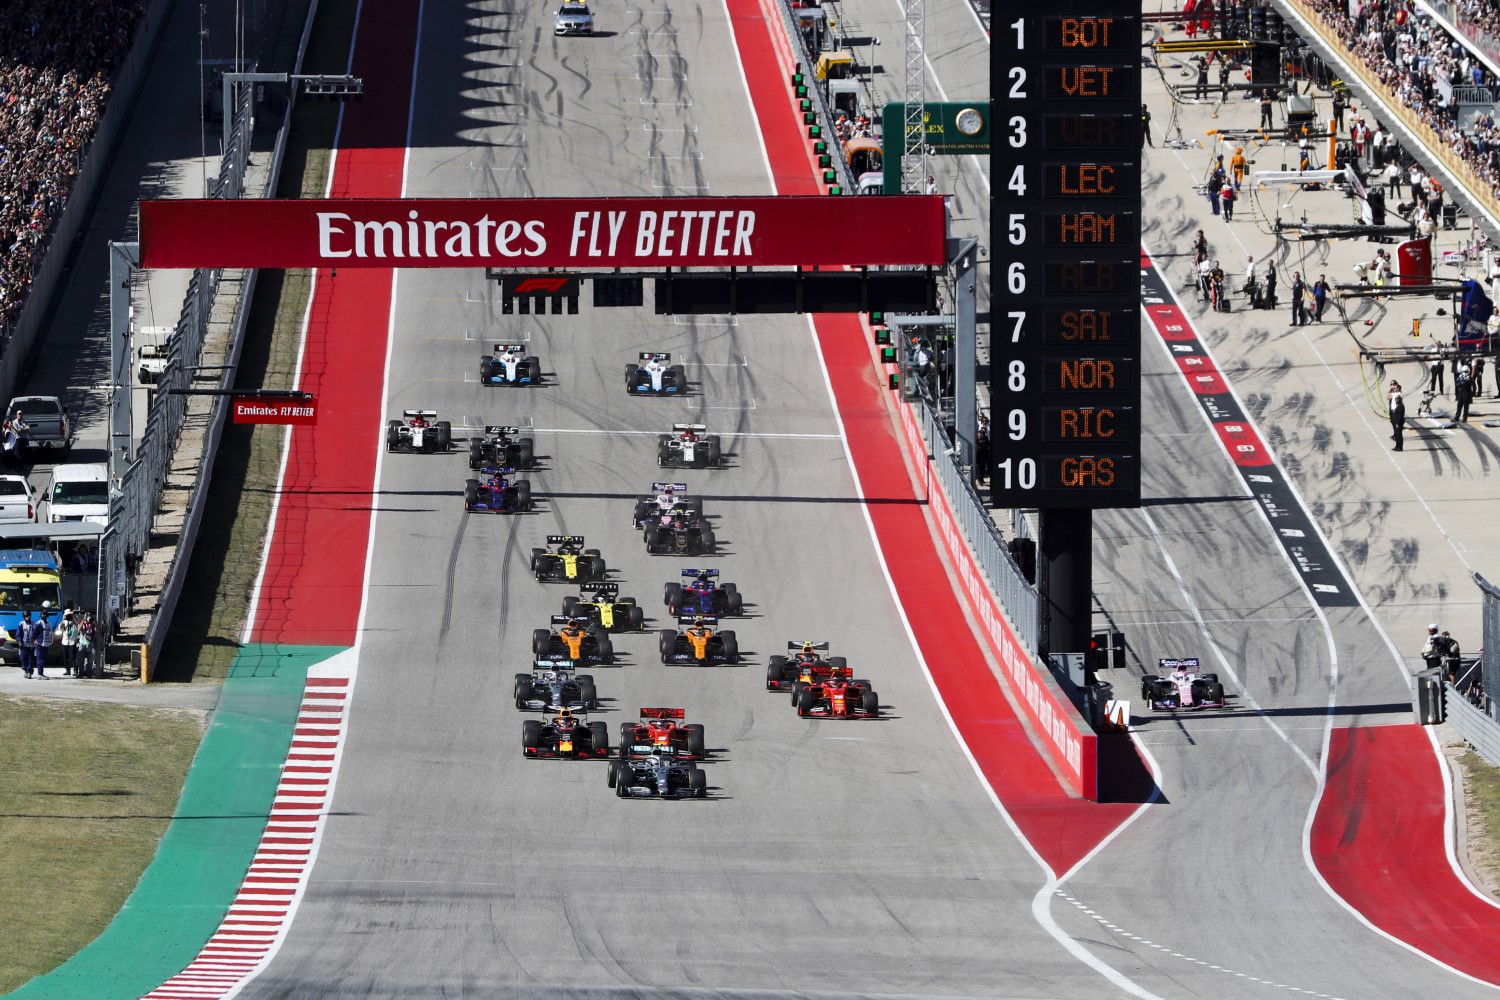 Austin sells out and does not fear a Miami race